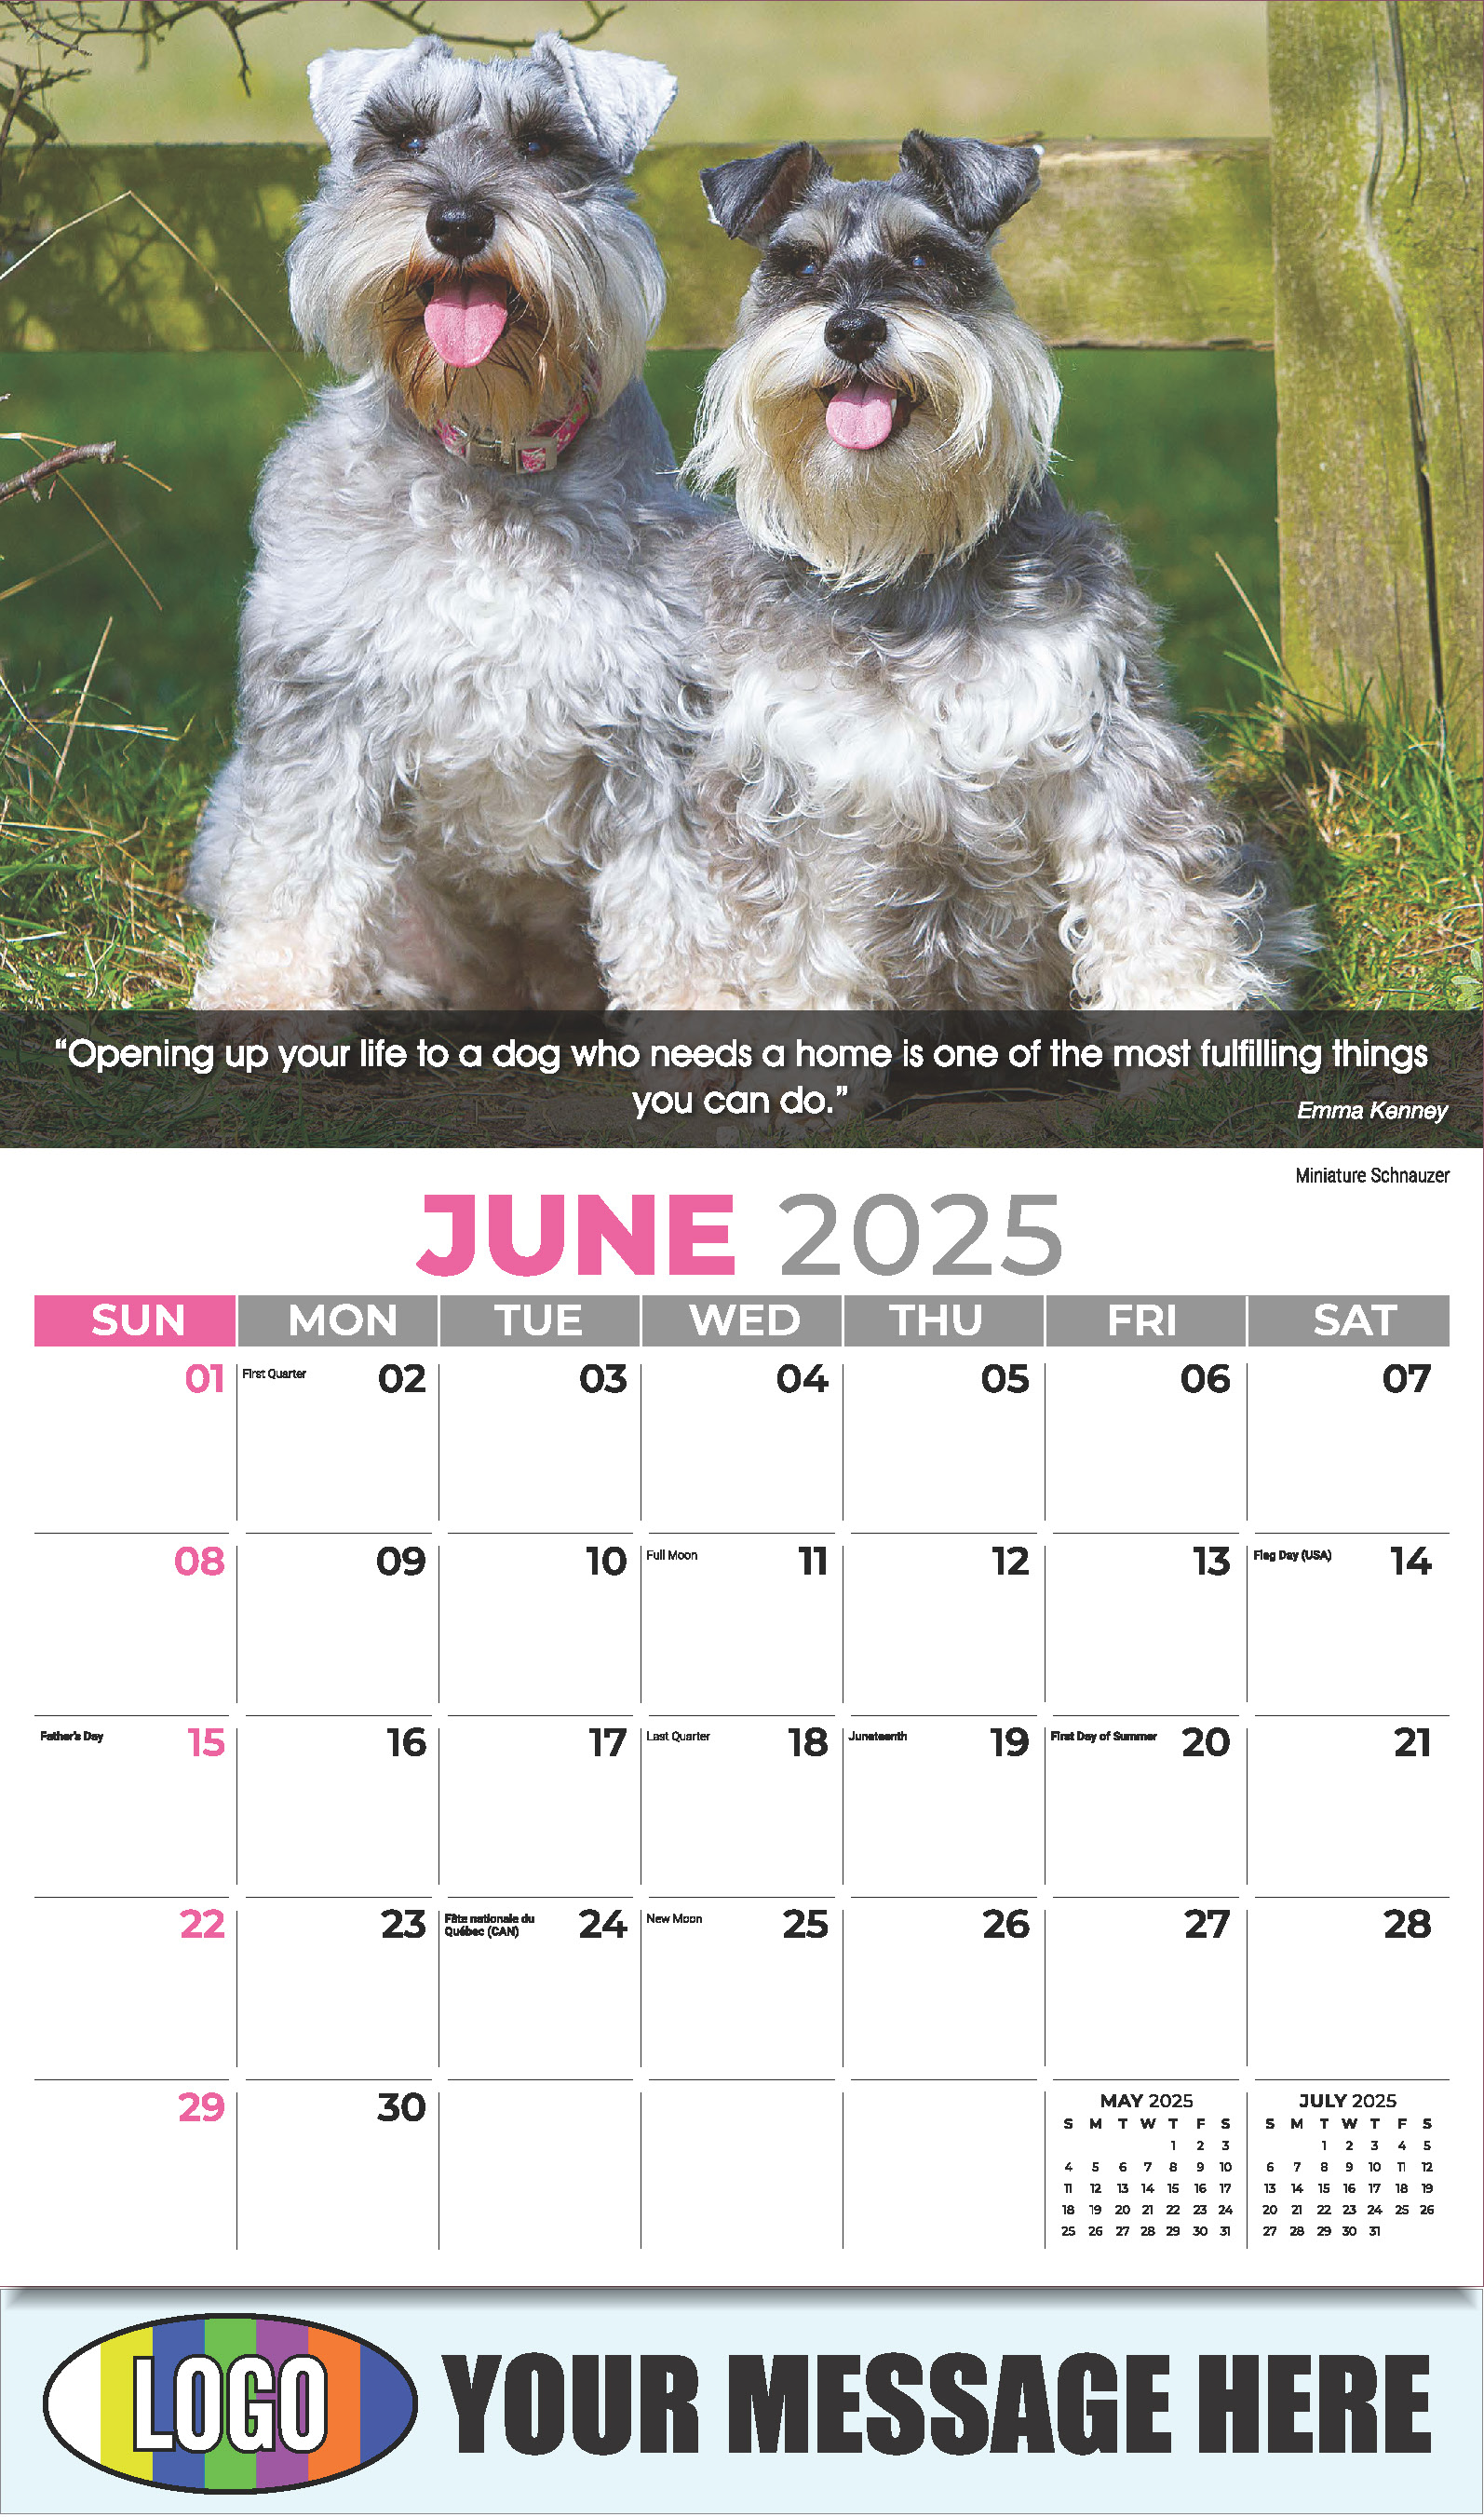 Dogs 2025 Vets and Pets Business Promotion Calendar - June